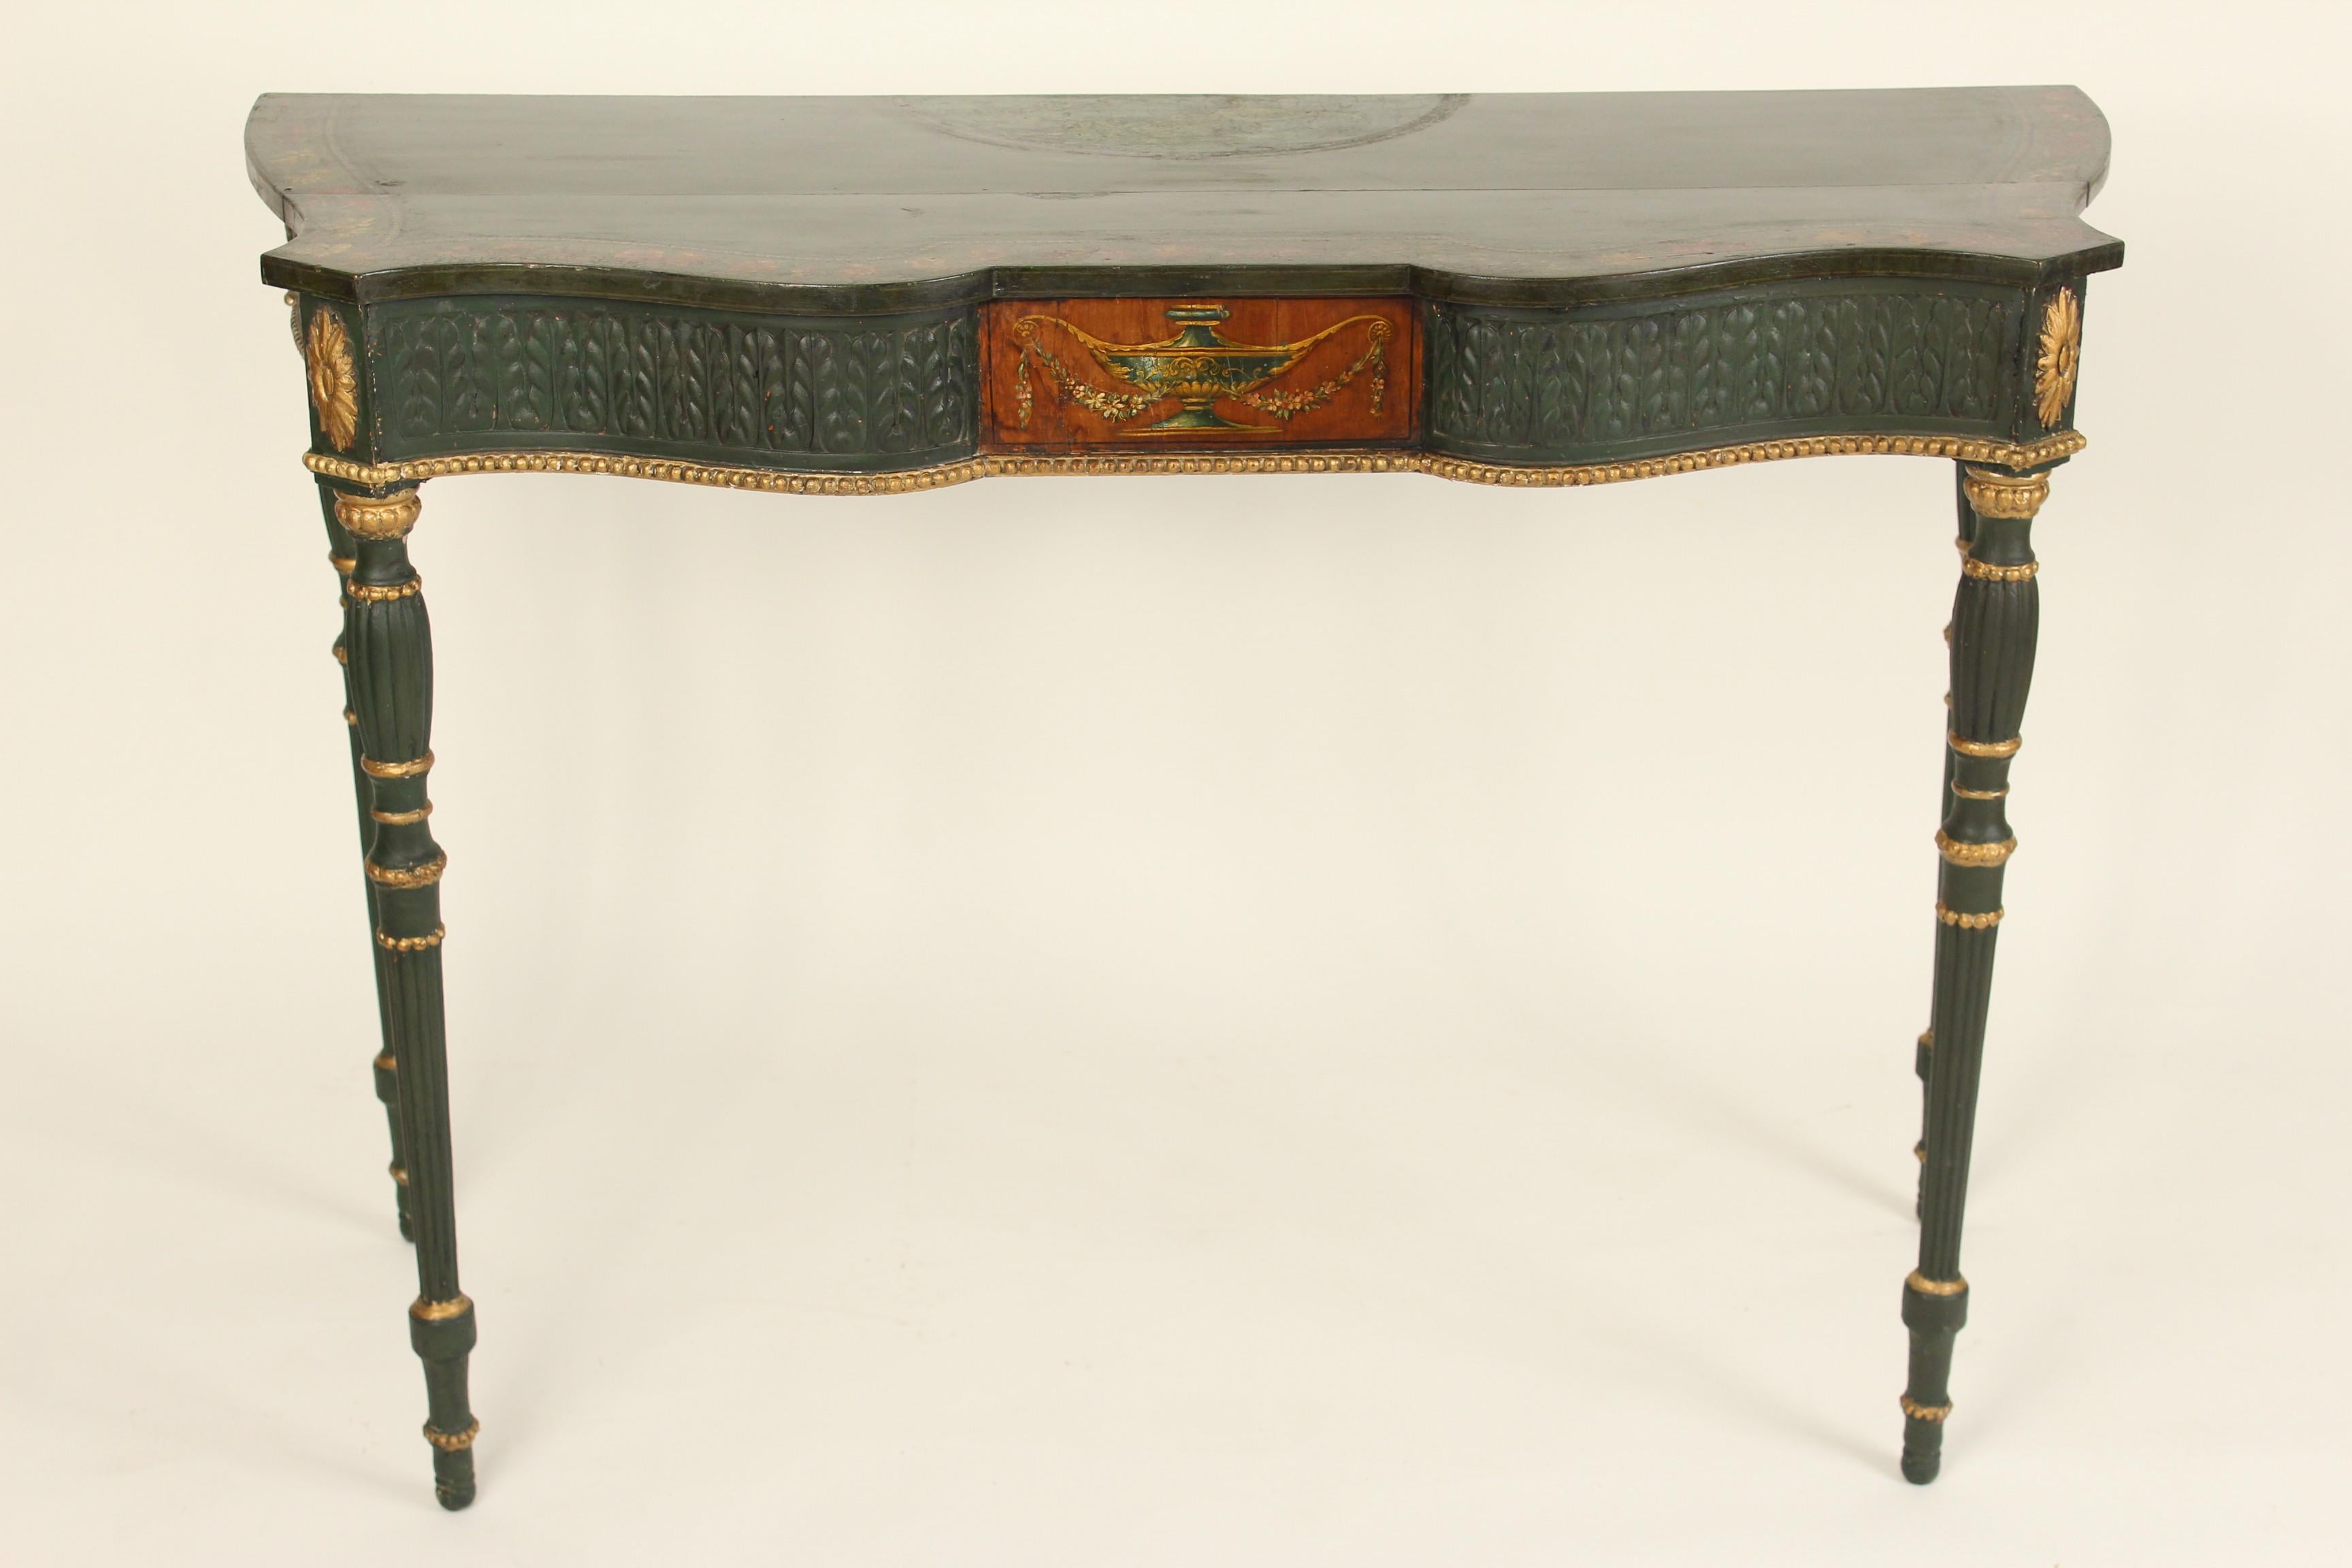 English Edwardian painted and gilt decorated console table, circa 1900.